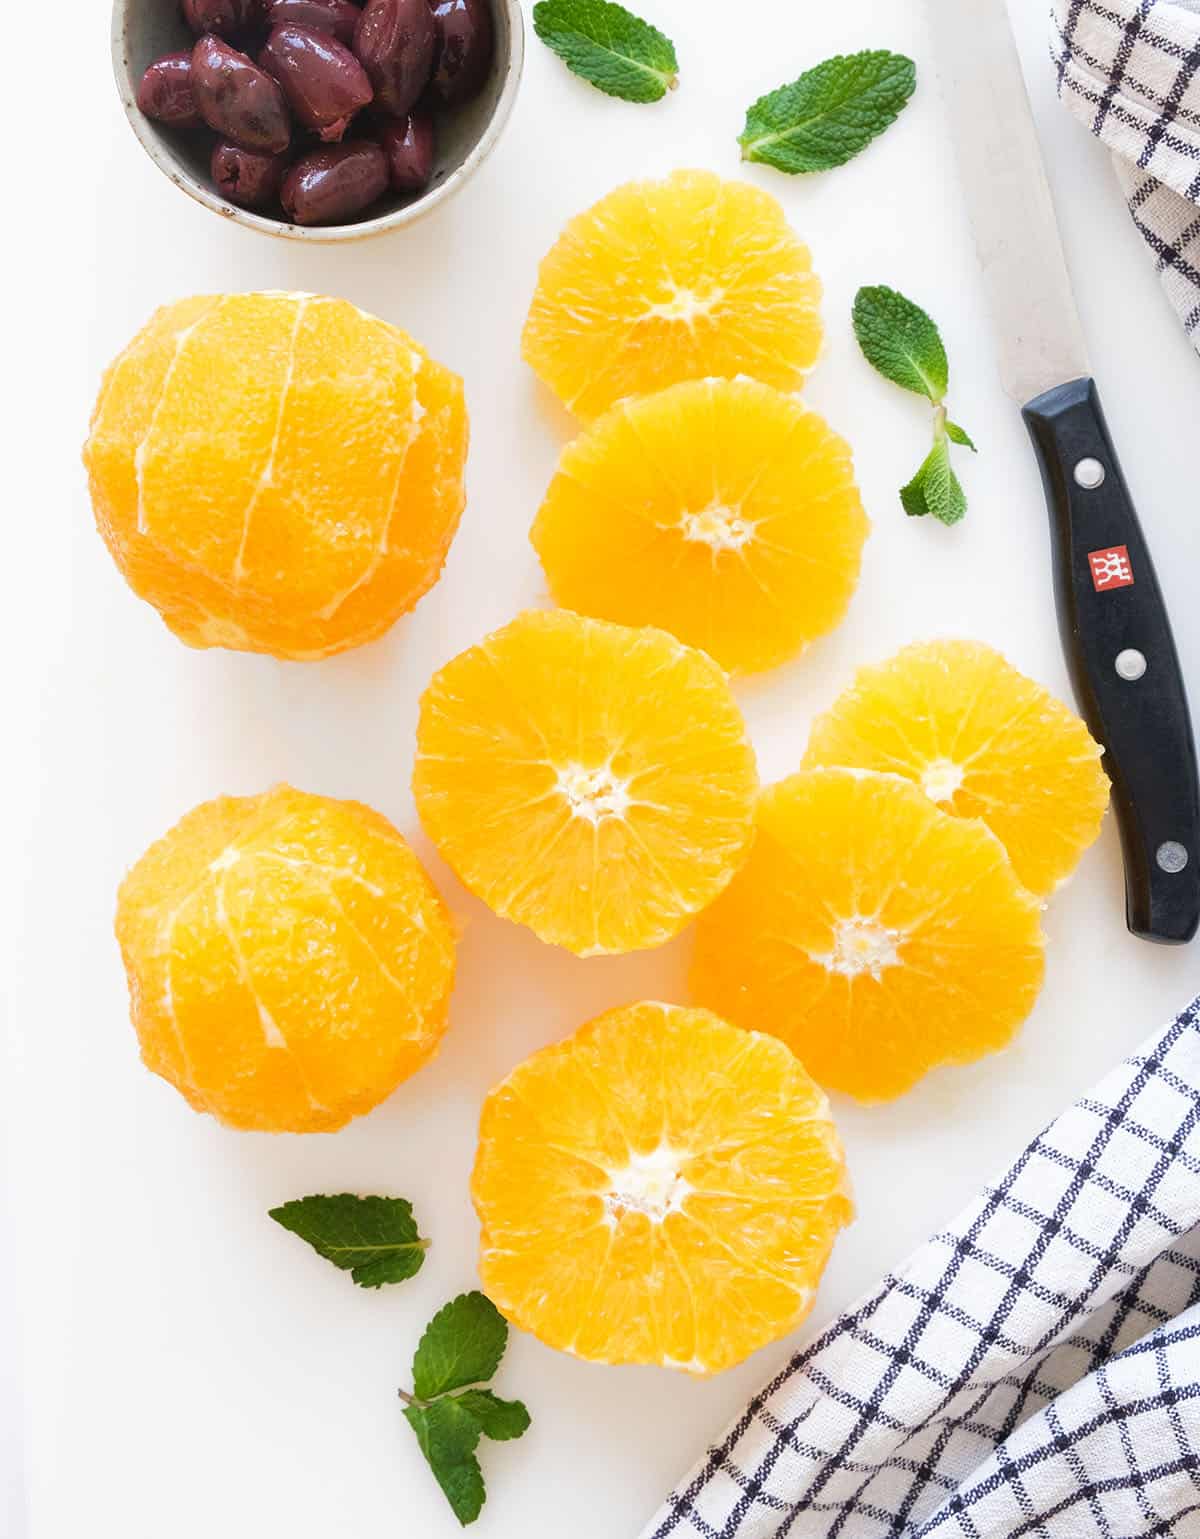 Top view of a knife and oranges sliced into rounds over a white background.